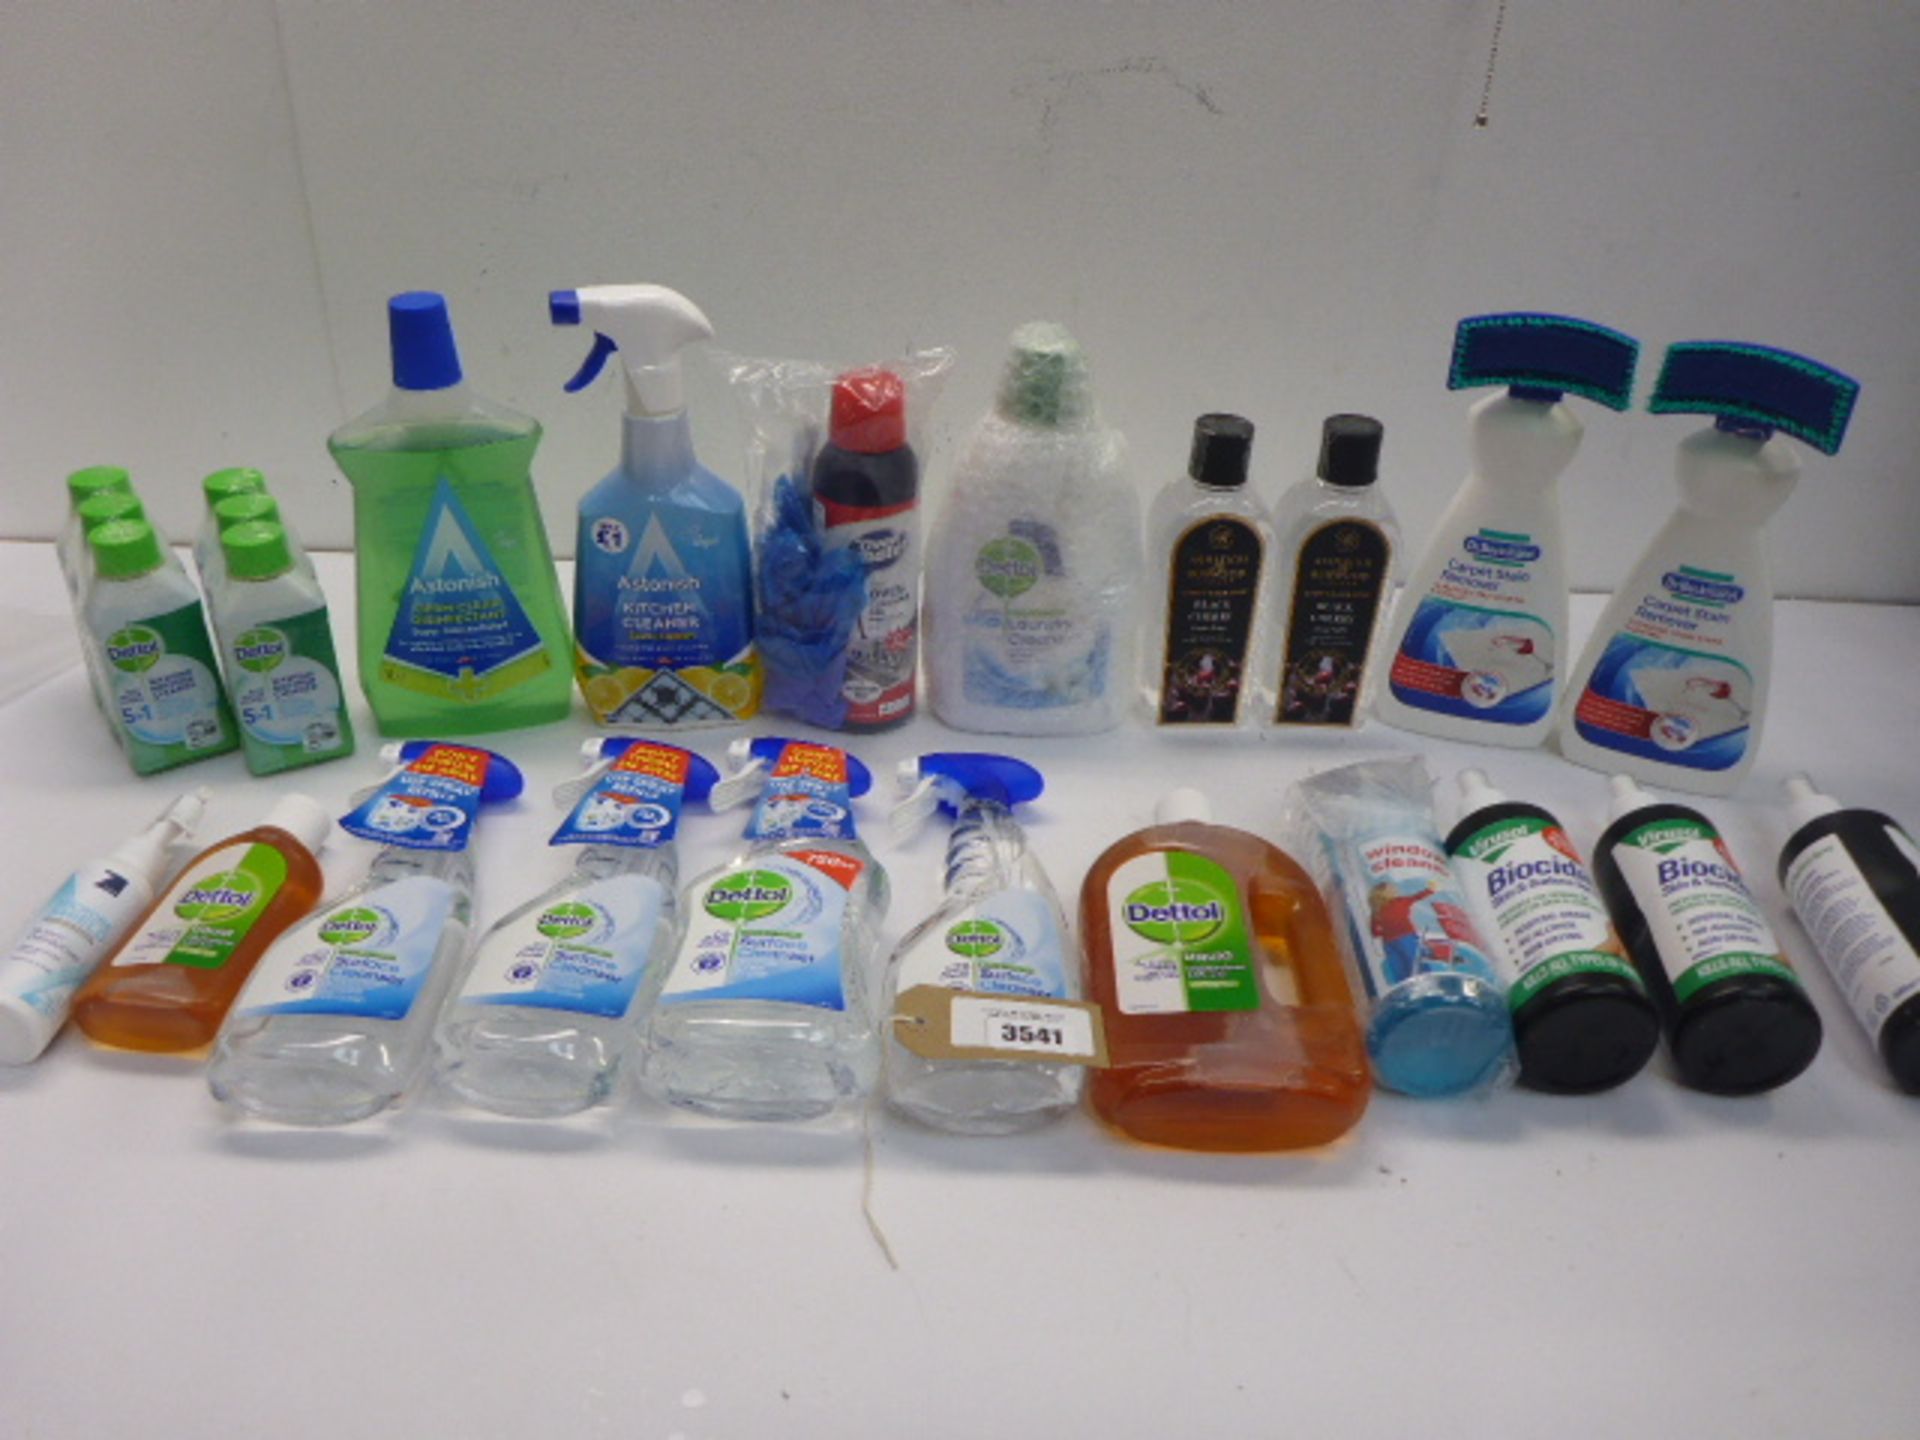 Selection of disinfectants, carpet stain remover, washing machine cleaner, laundry cleaner, oven